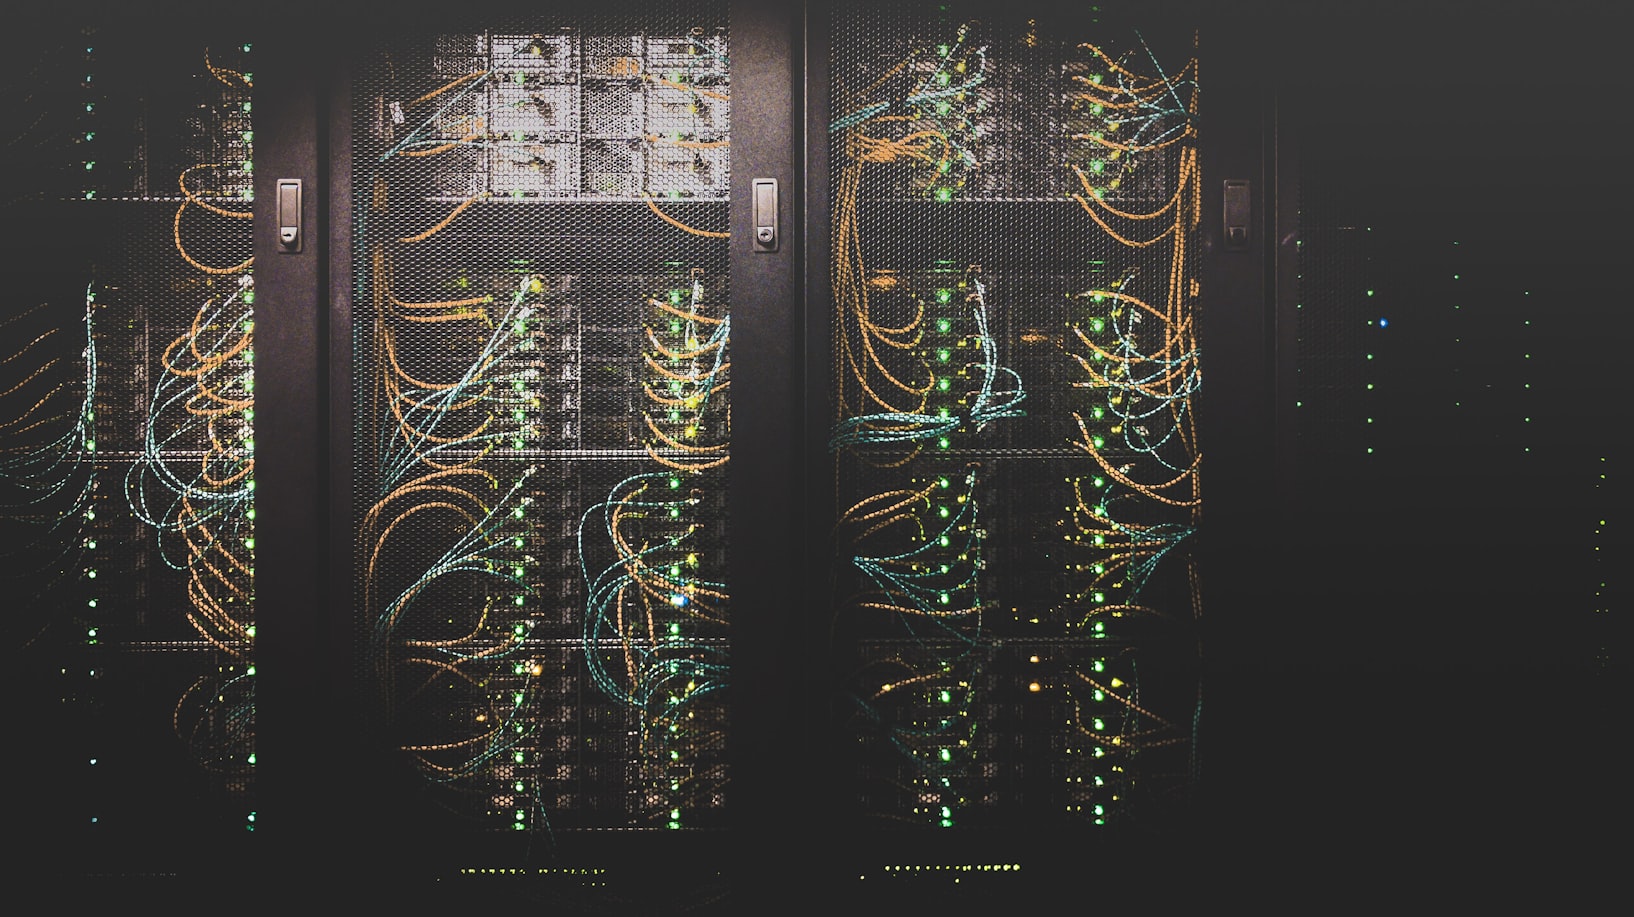 A great deal of server stacks connected via wires to represent web hosting and registry